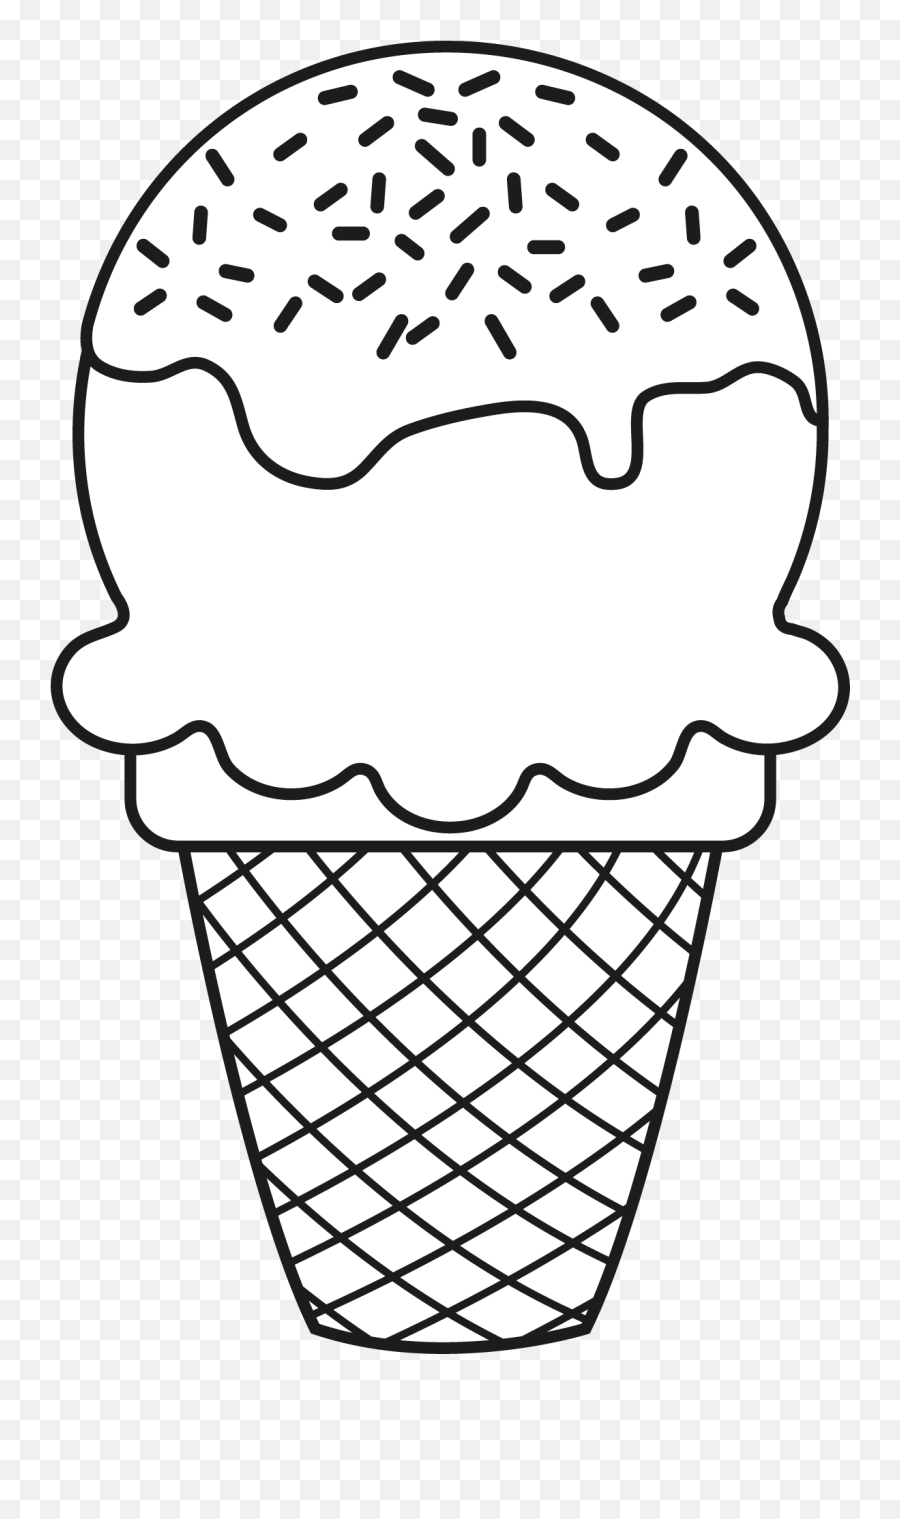 Ice Cream Coloring Pages - Summer Ice Cream Coloring Pages Emoji,Emoji Ice Cream Cake